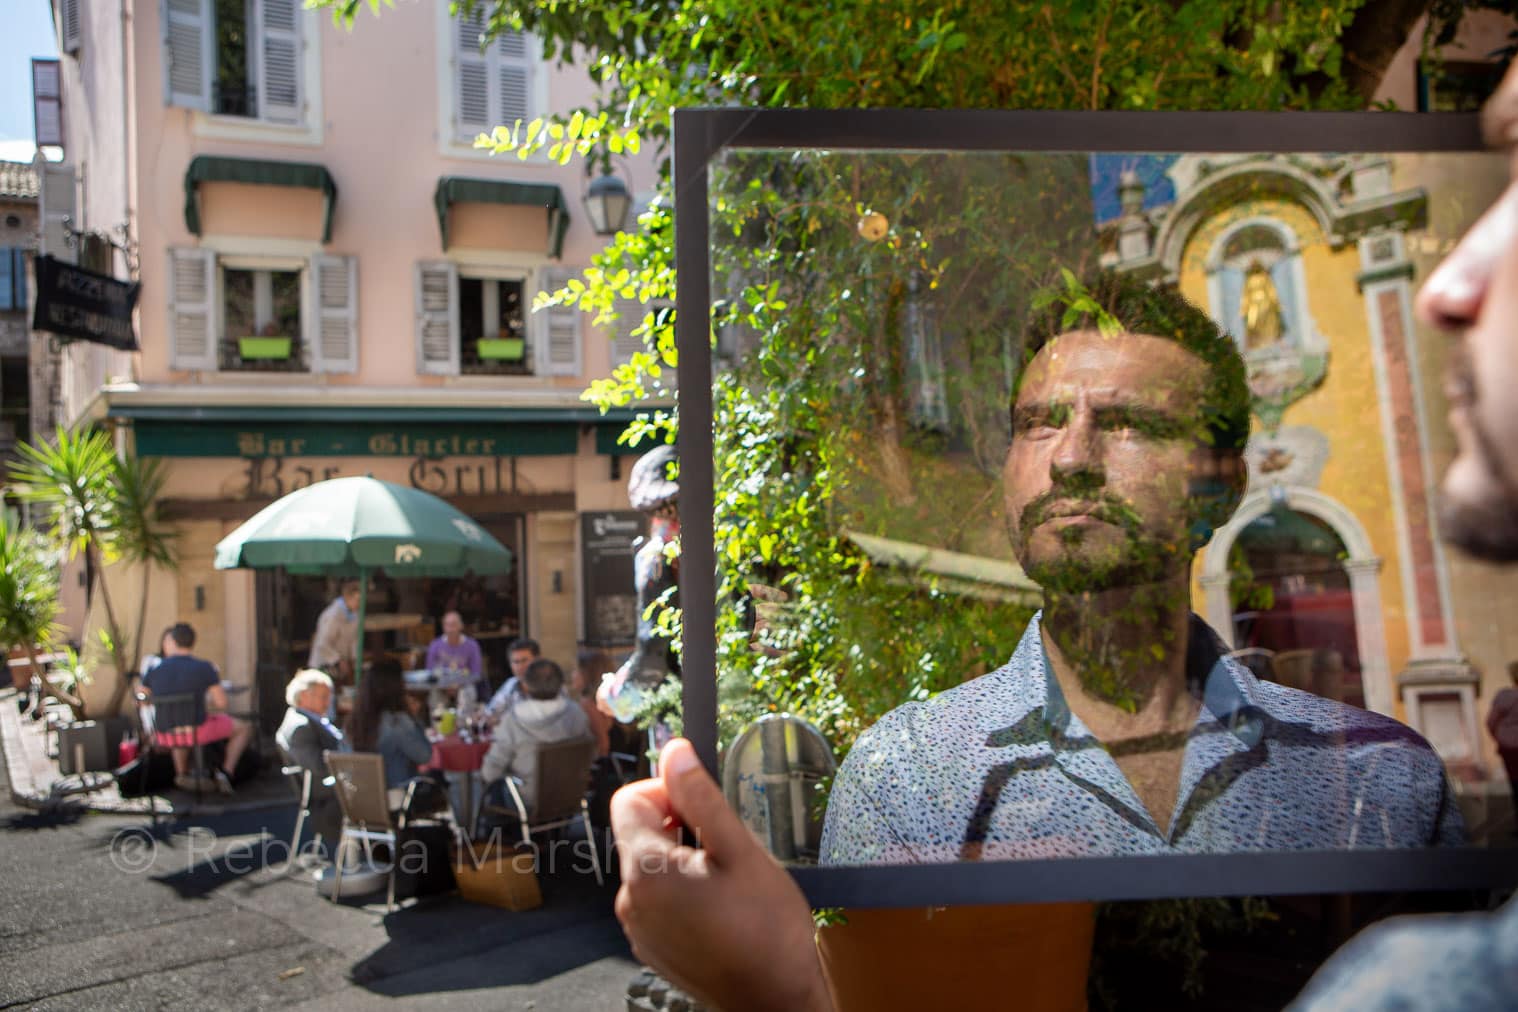 Photograph of the reflection of a man in a sheet of glass that he holds in a busy town square